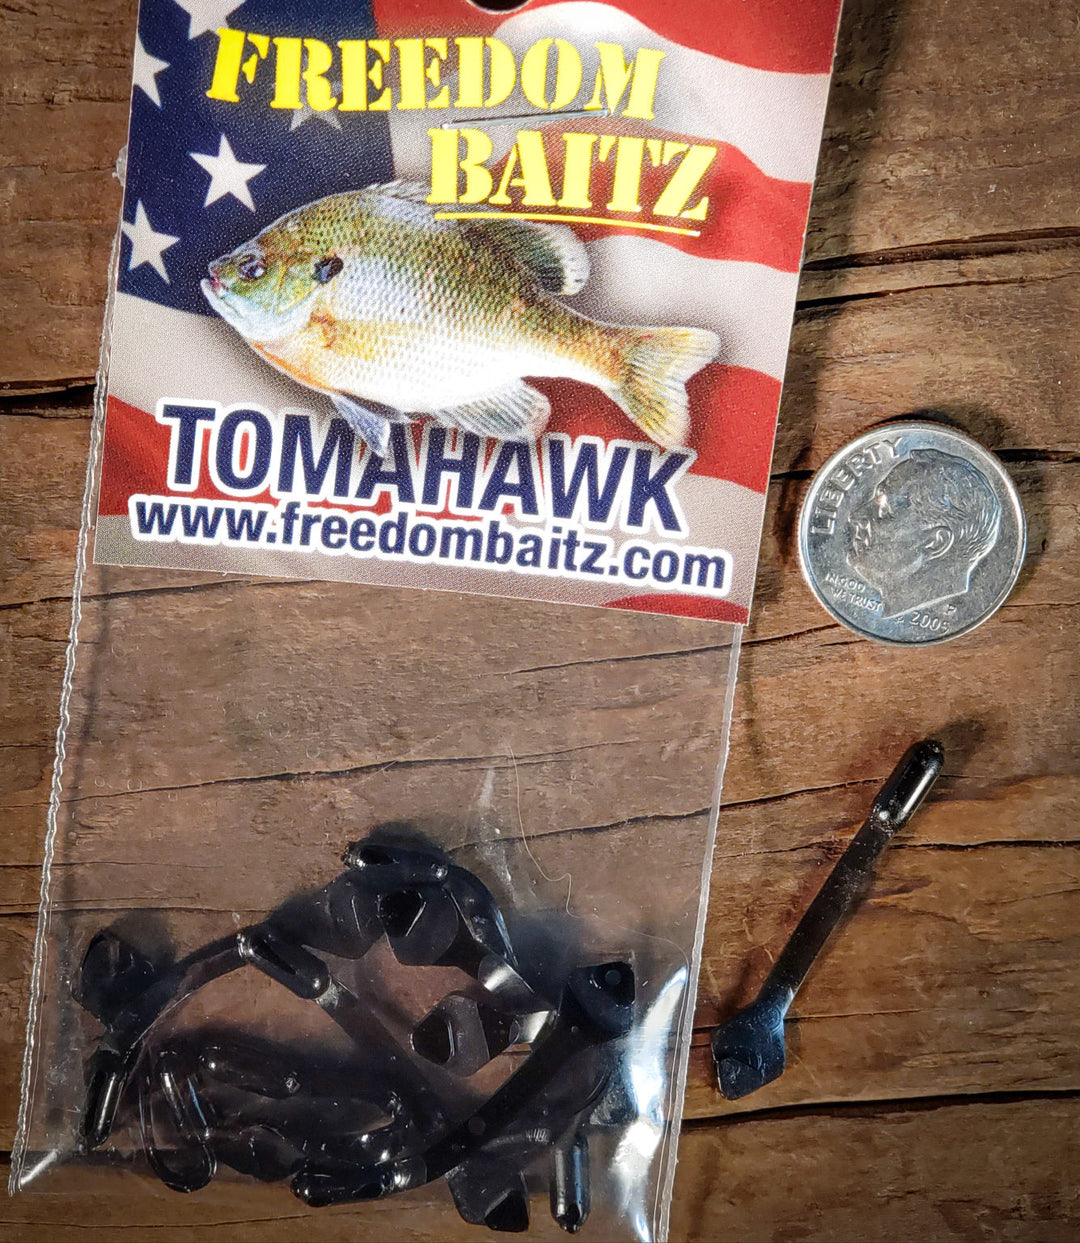 The @freedombaitzllc Tomahawk absolutely cleaned up the crappies for us!  🧹💣